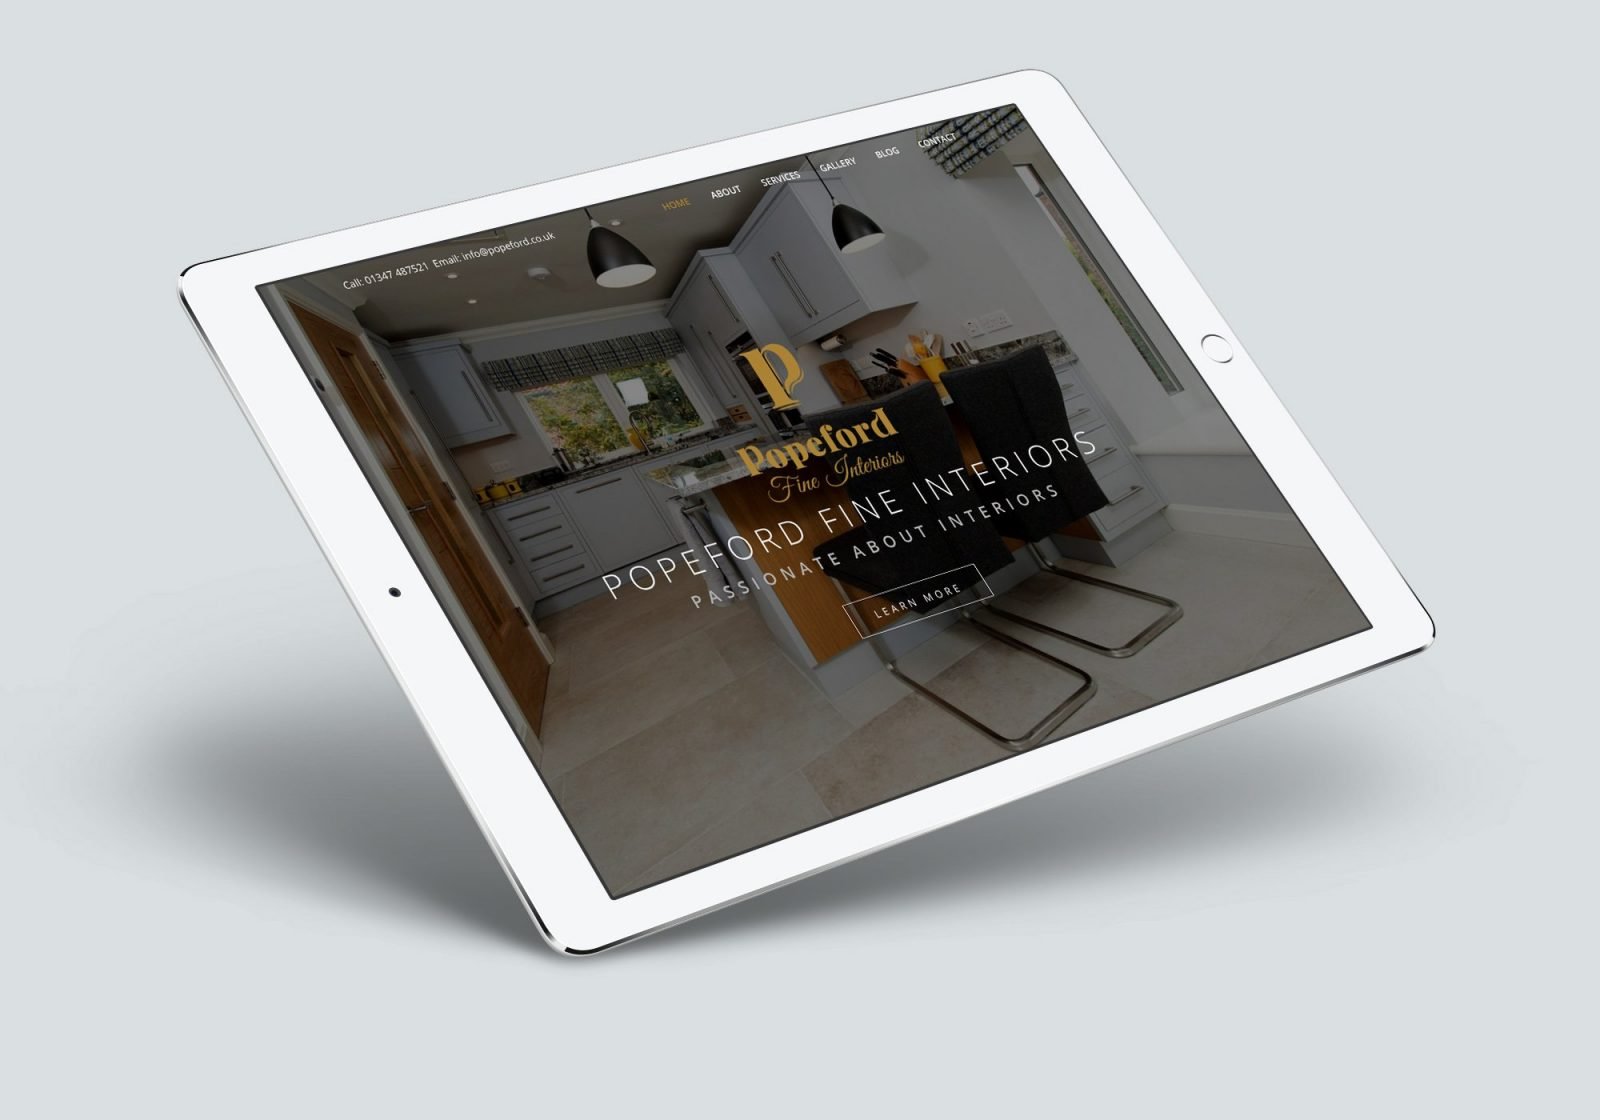 An ipad showing the home page for Popeford Interior Designers website design